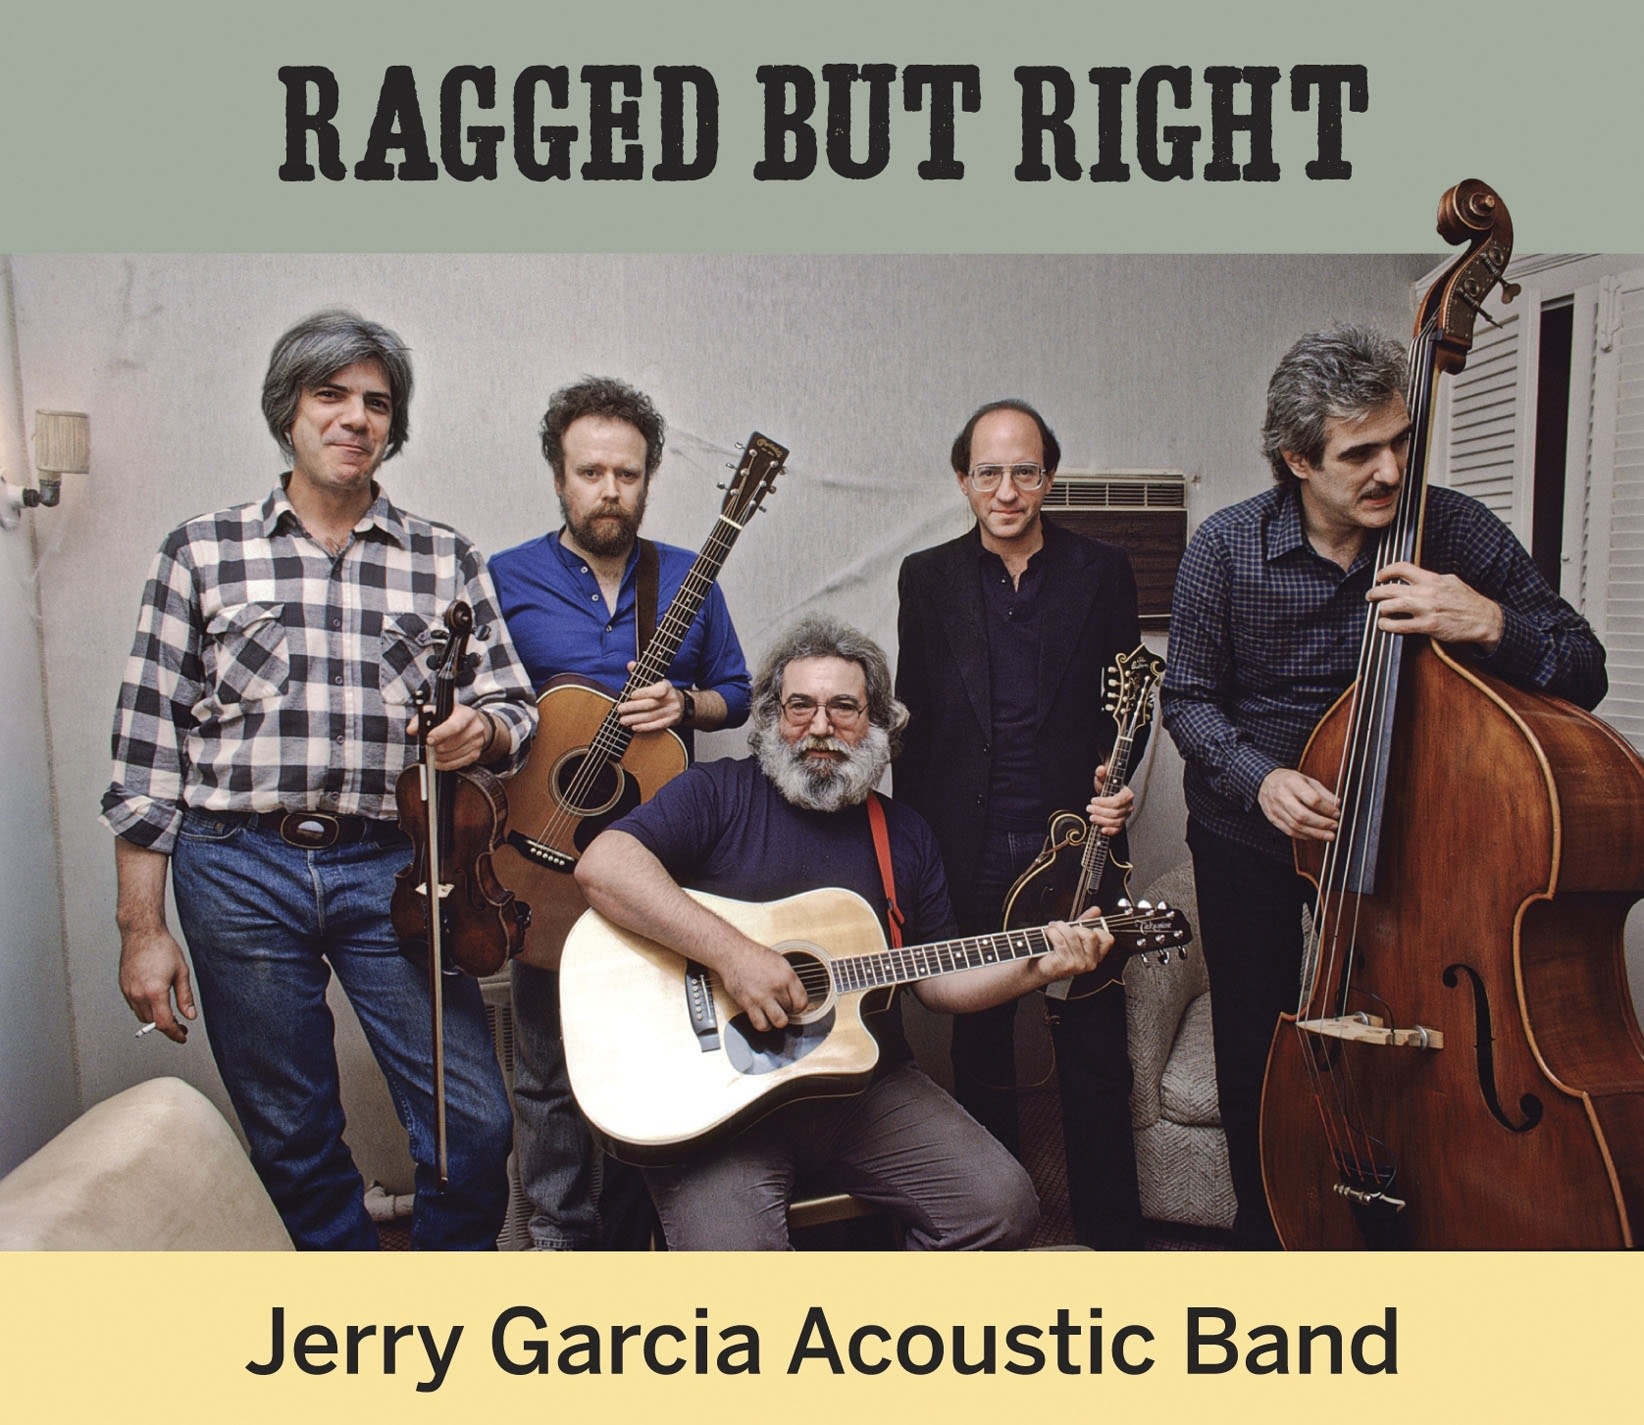 Jerry Garcia Acoustic Band - Ragged But Right